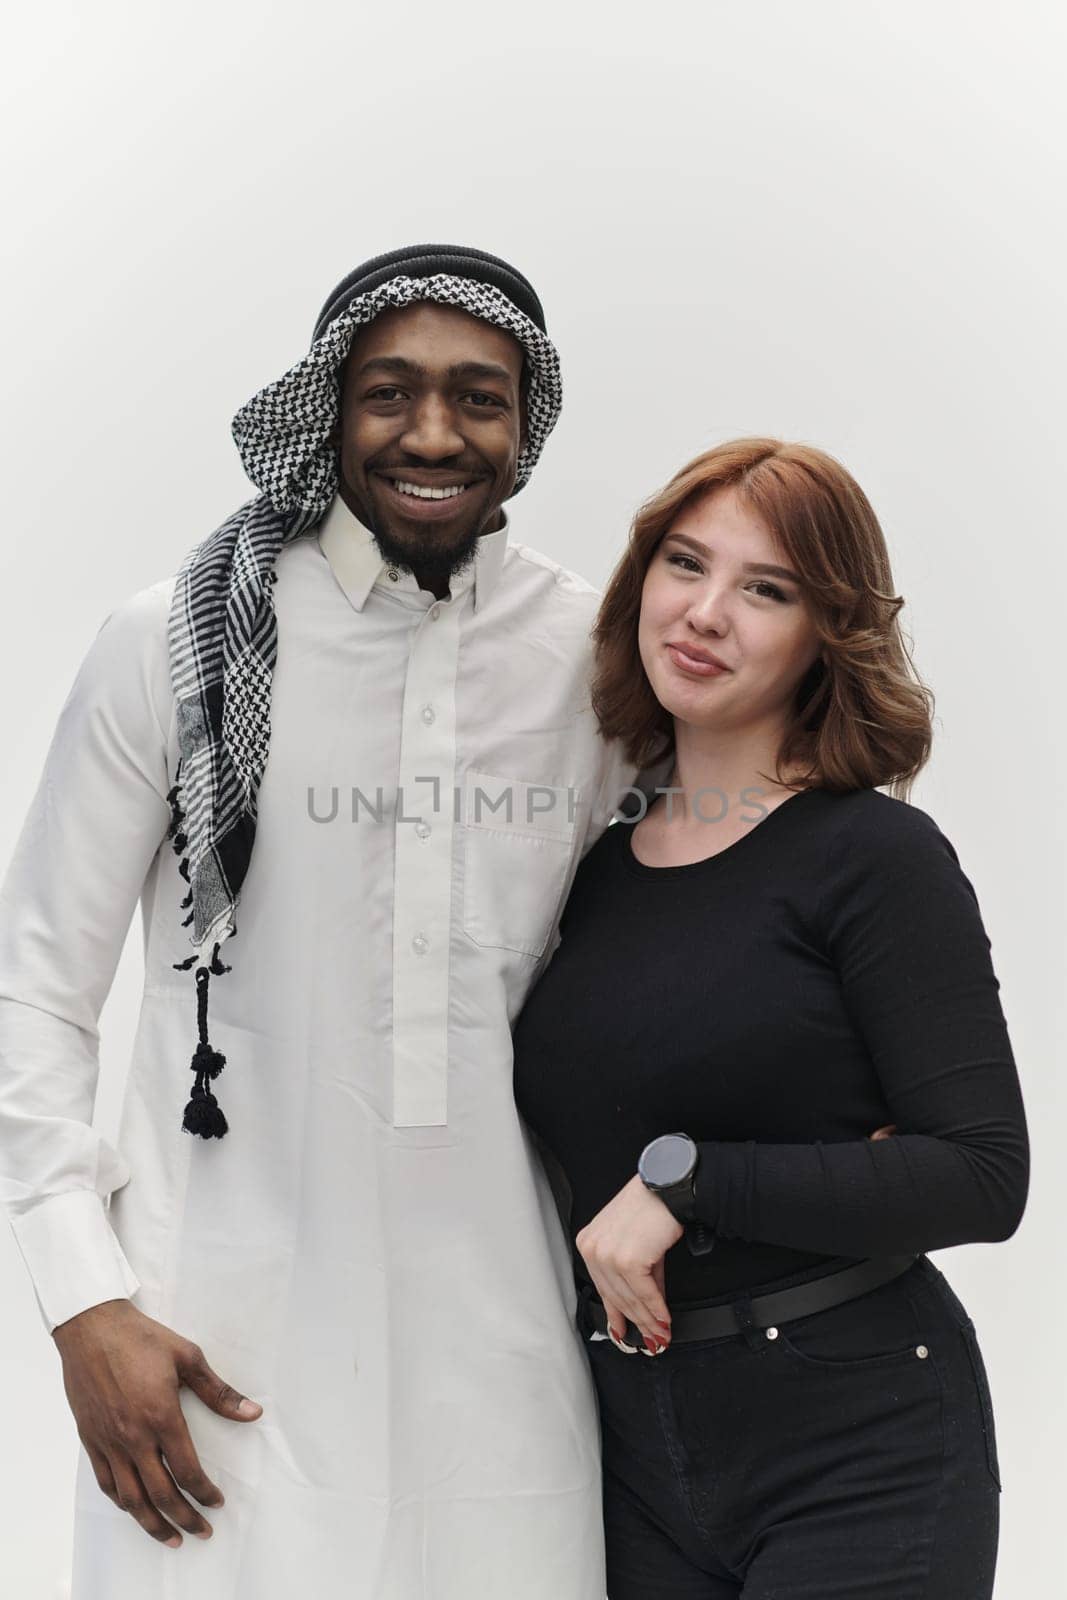 Muslim entrepreneur and a contemporary red-haired girl strike a pose together against a clean white background, embodying confidence, diversity, and a dynamic entrepreneurial spirit in their partnership by dotshock